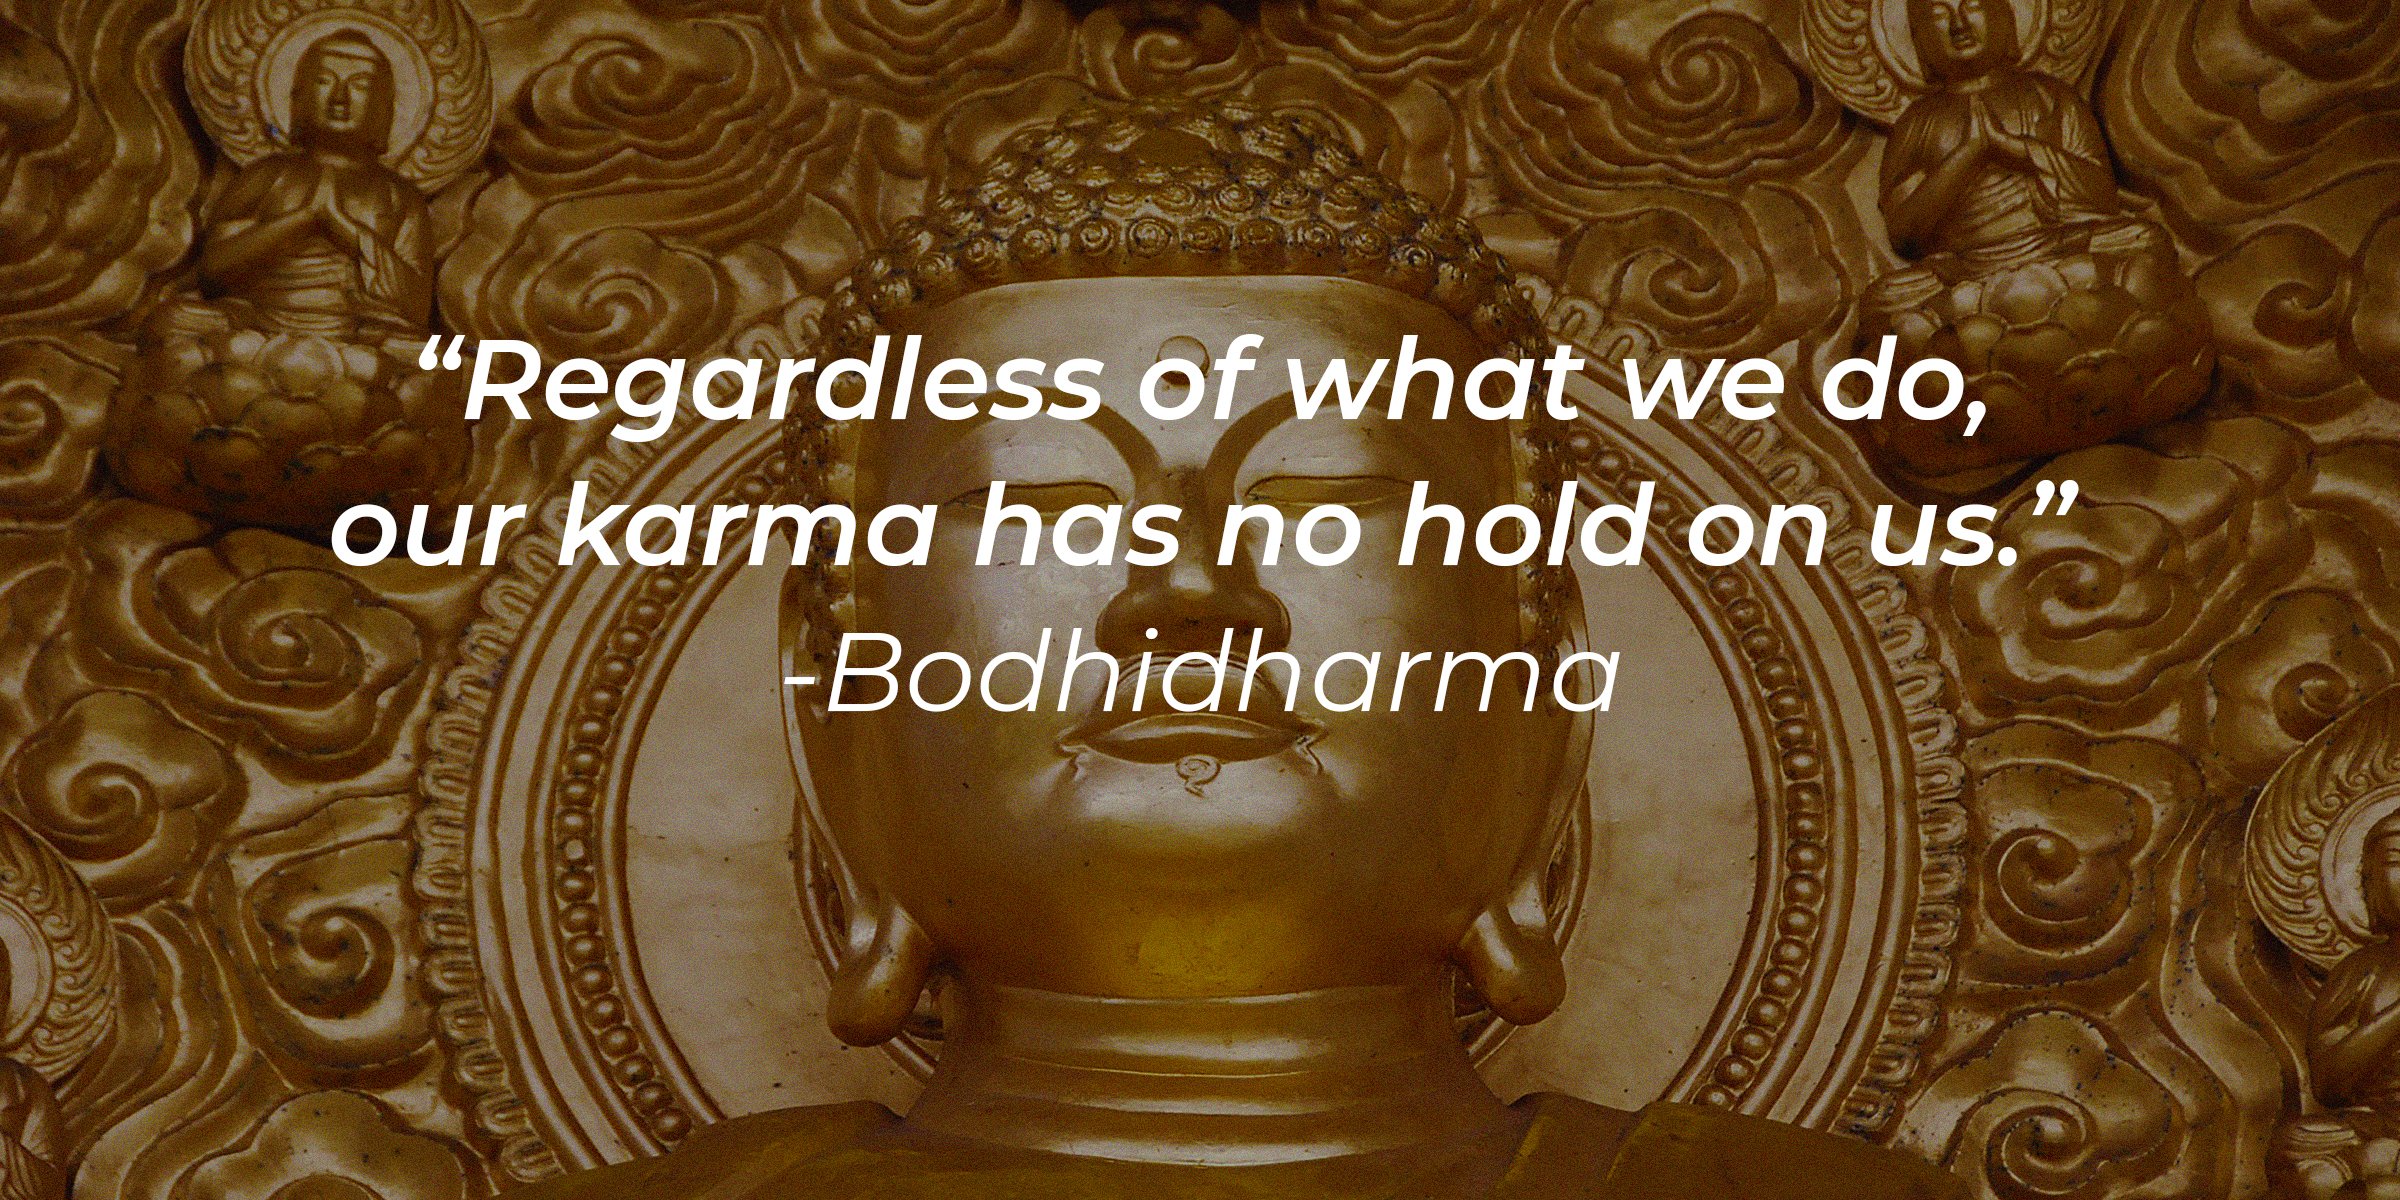 Source: Unsplash | A photo of Buddha with the quote, "Regardless of what we do, our karma has no hold on us" by Bodhidharma